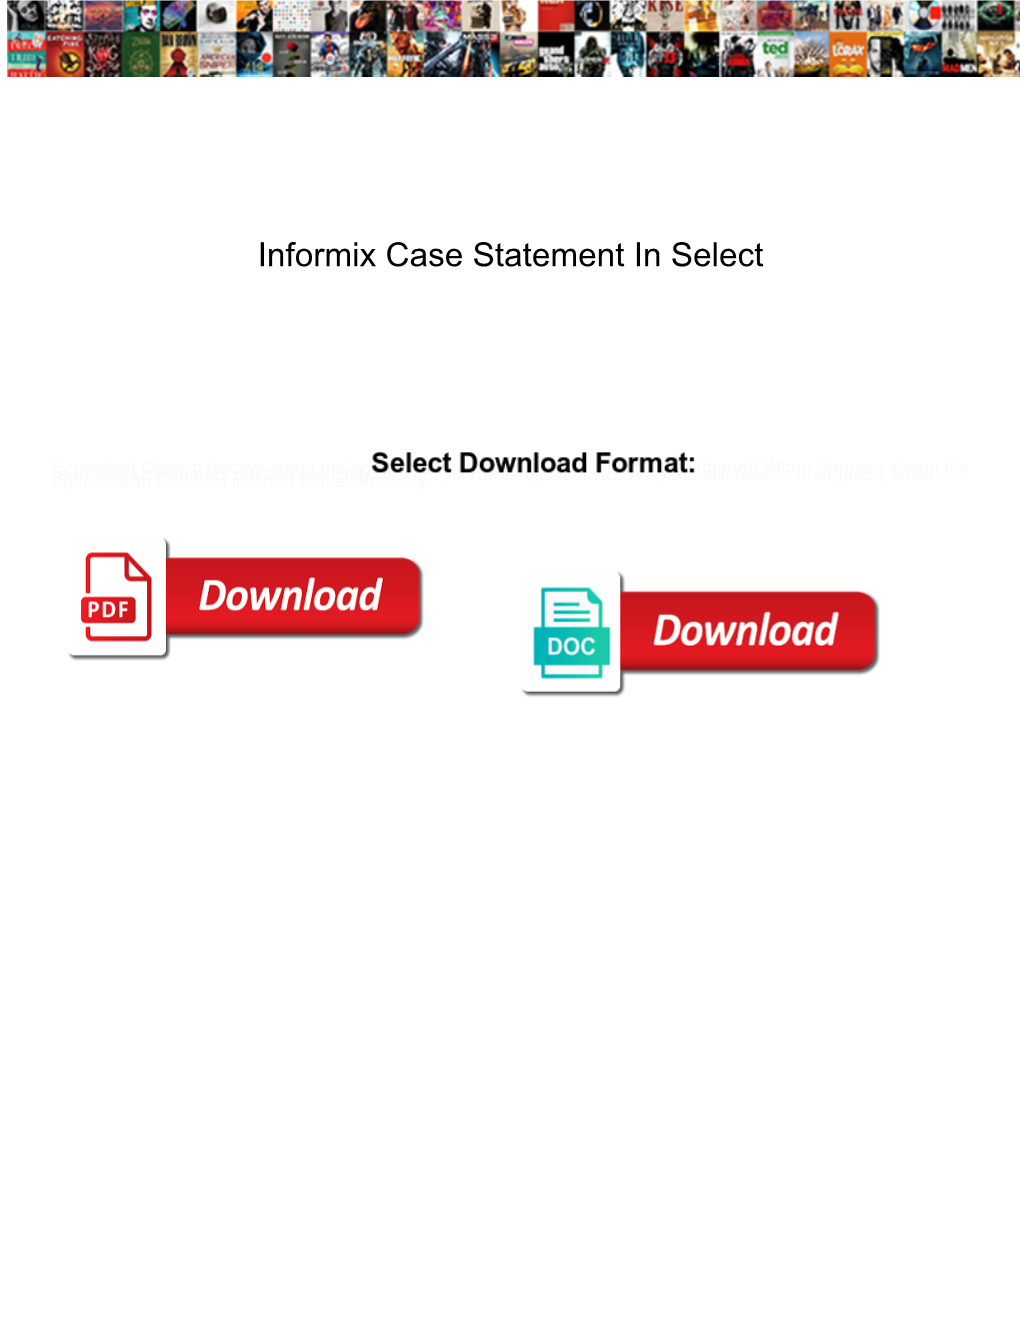 Informix Case Statement in Select